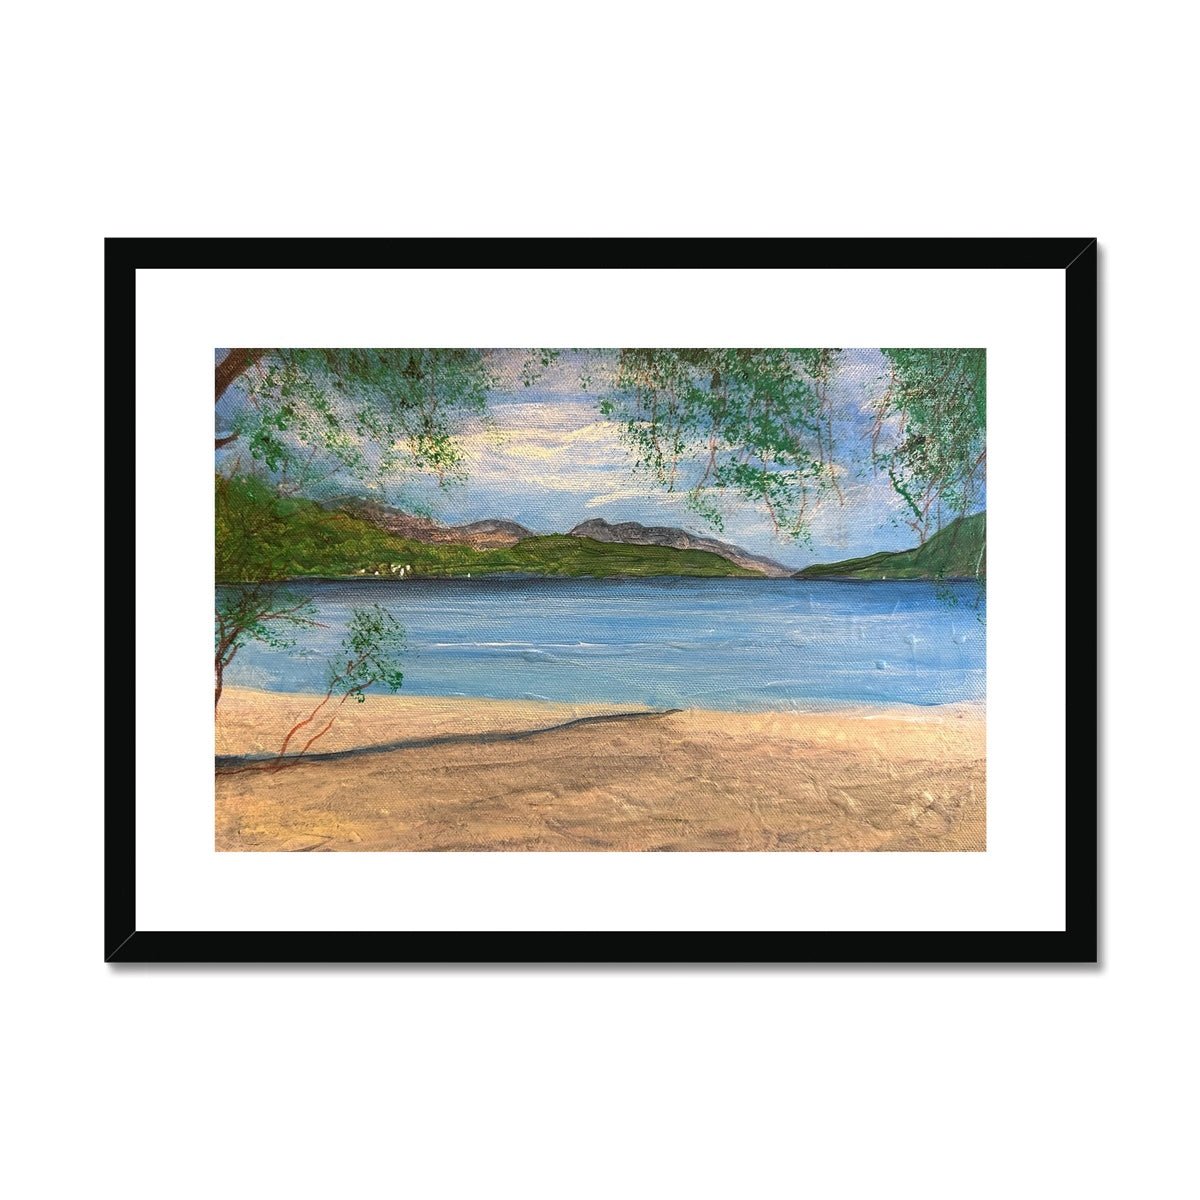 Firkin Point Loch Lomond Painting | Framed & Mounted Prints From Scotland-Framed & Mounted Prints-Scottish Lochs & Mountains Art Gallery-A2 Landscape-Black Frame-Paintings, Prints, Homeware, Art Gifts From Scotland By Scottish Artist Kevin Hunter